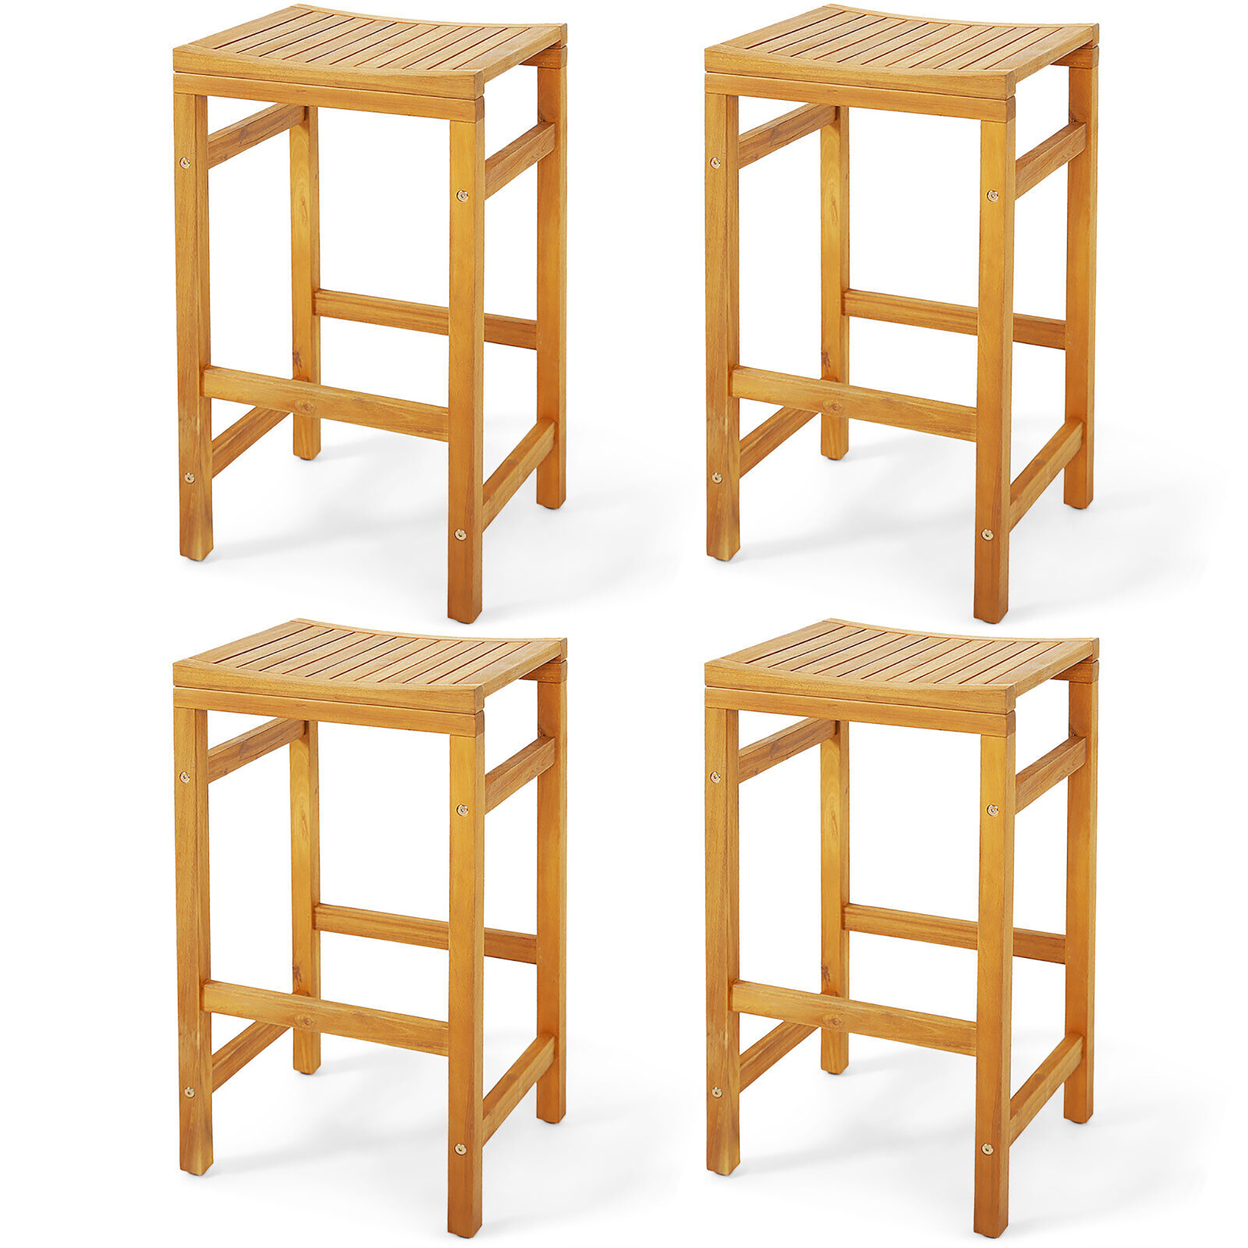 Set Of 4 Acacia Wood Bar Stool 30-Inch Height Bar Chair With Saddle Shaped Seat